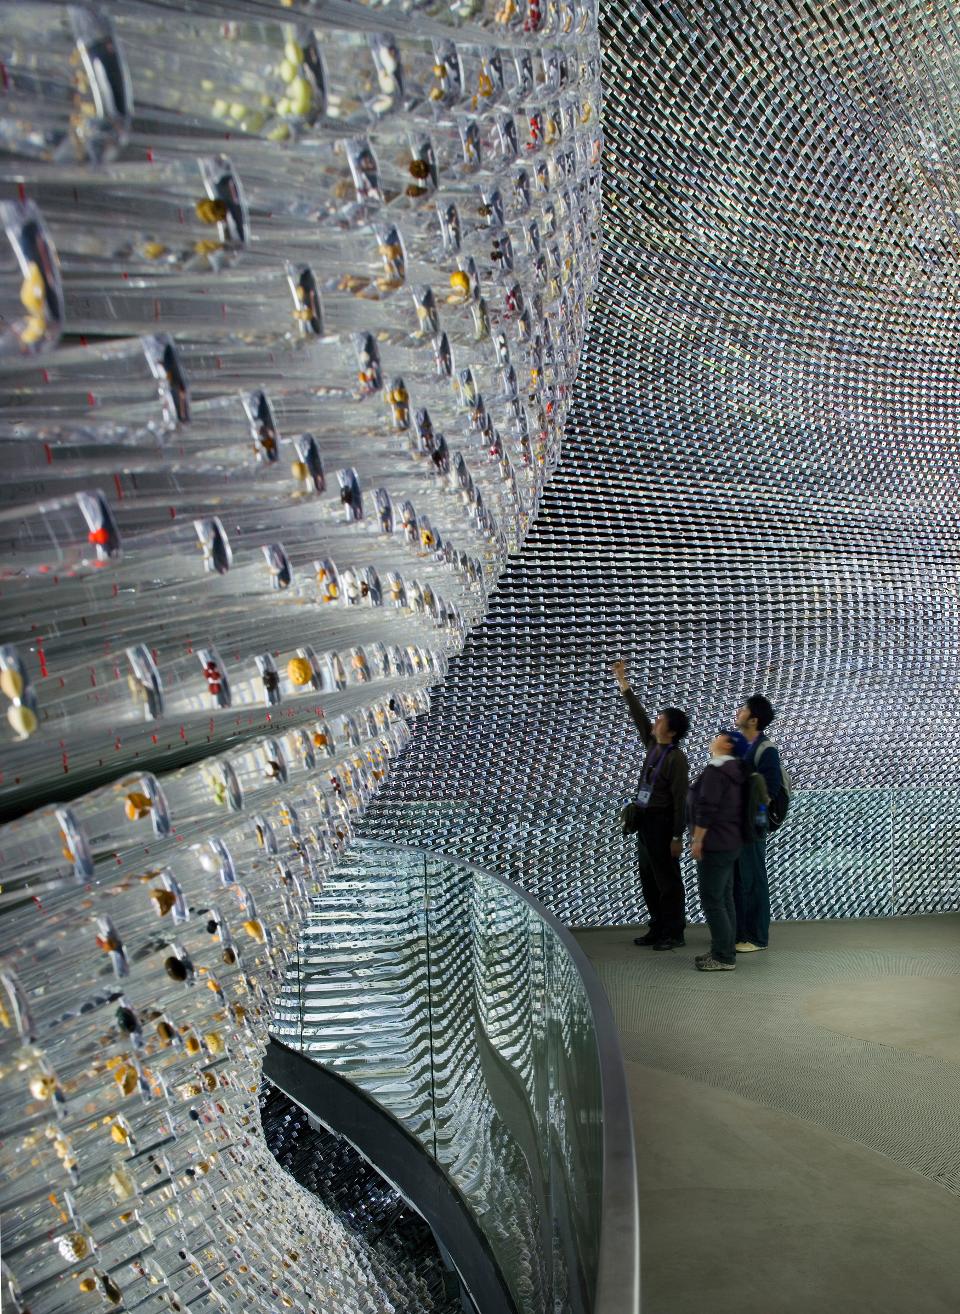 Shanghai Expo 2010 Uk PavilionShanghaiChina Architect:  Thomas Heatherwick Studio 2010 'Seed Cathedral', Uk Pavilion, Thomas Heatherwick Studio, Shanghai Expo 2010, China Interior View Showing Visitors Observing The Seeds Encased In The Tips Of T